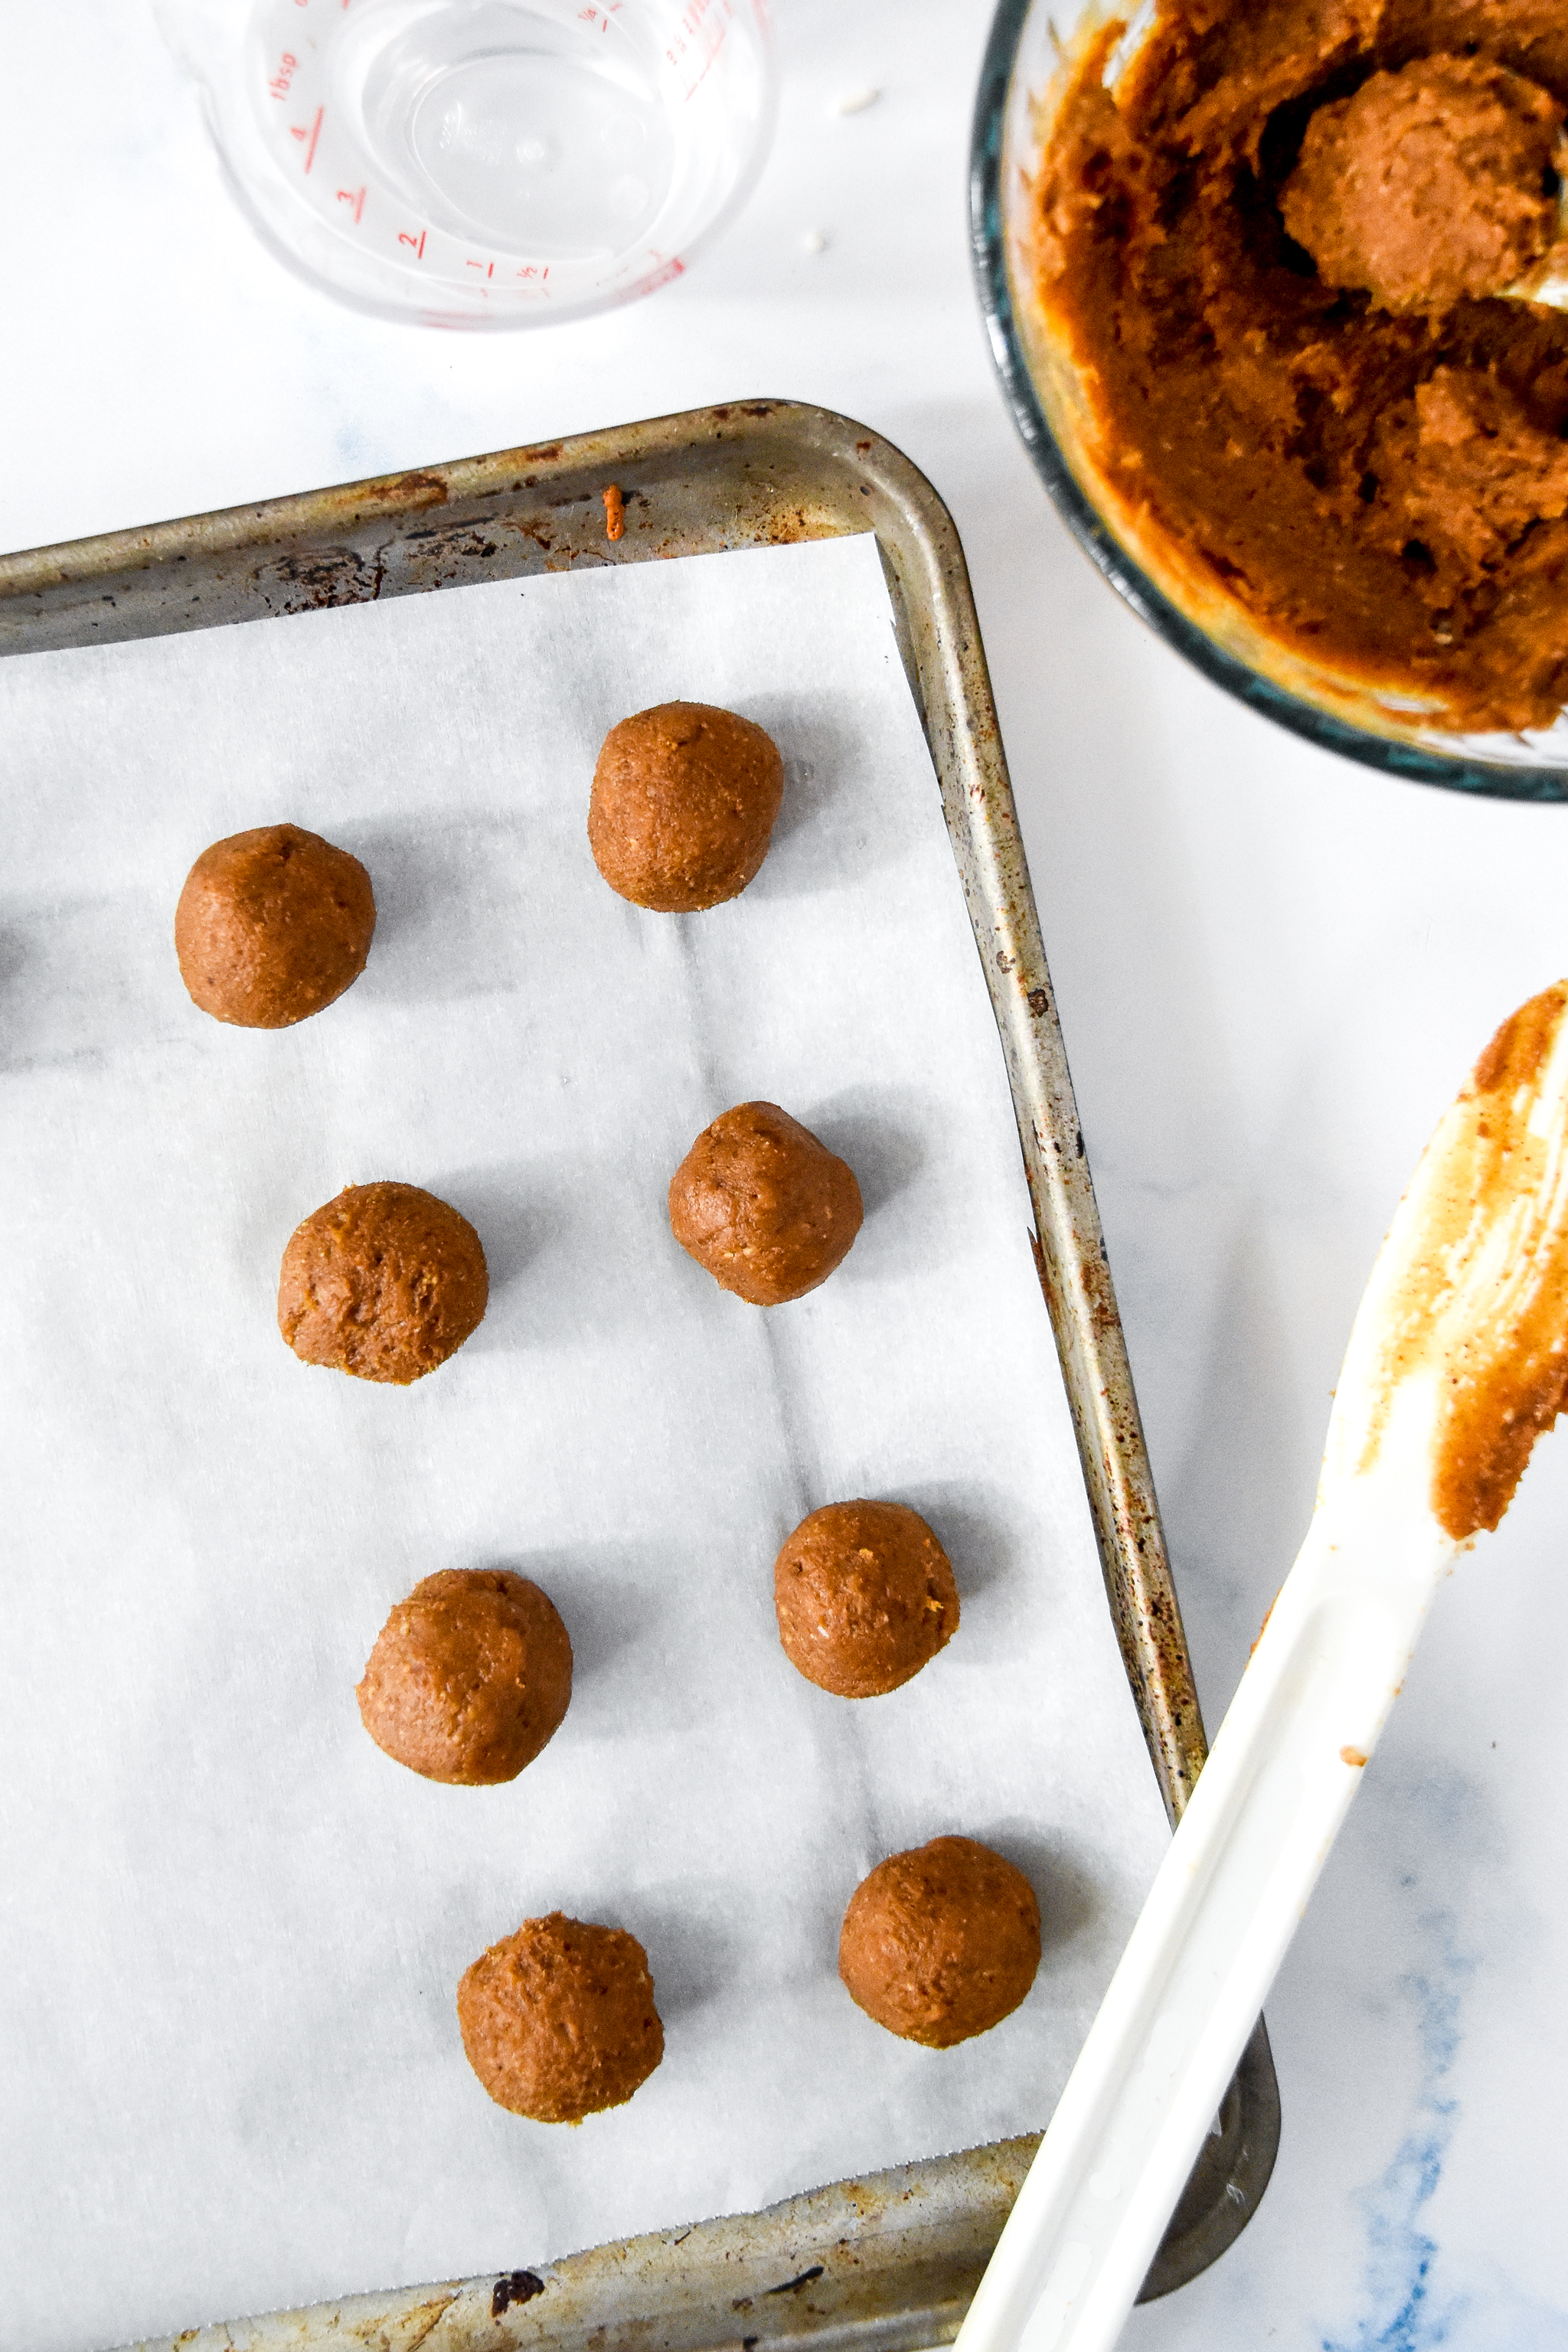 rolling date balls and placing on a parchment paper lined cookie sheet.